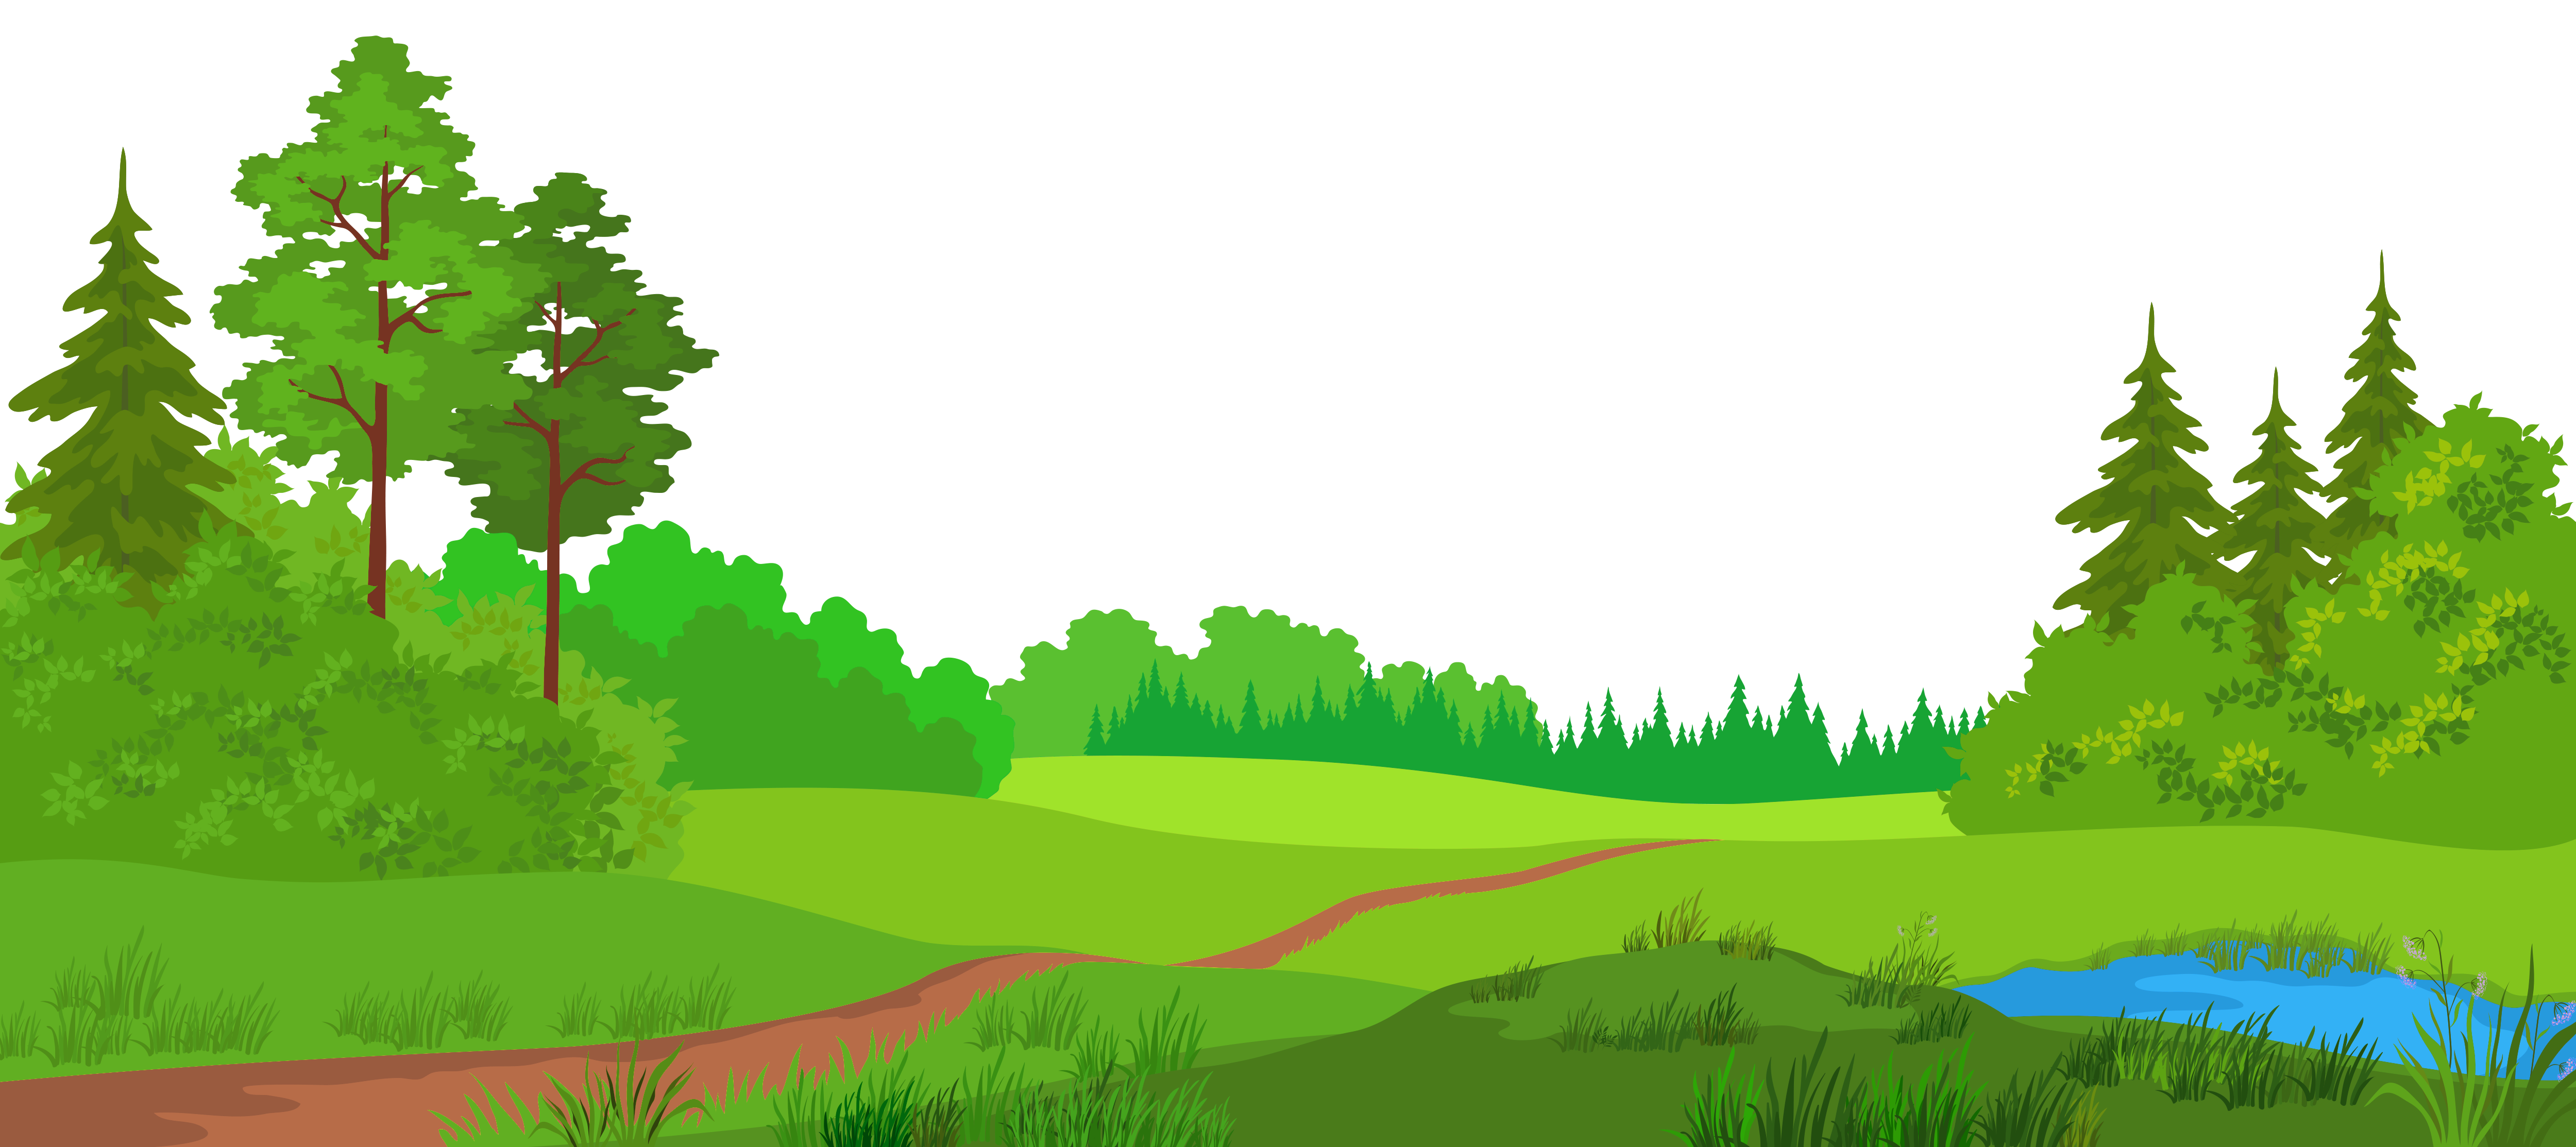 Trail clipart forest scene. Meadow with trees png